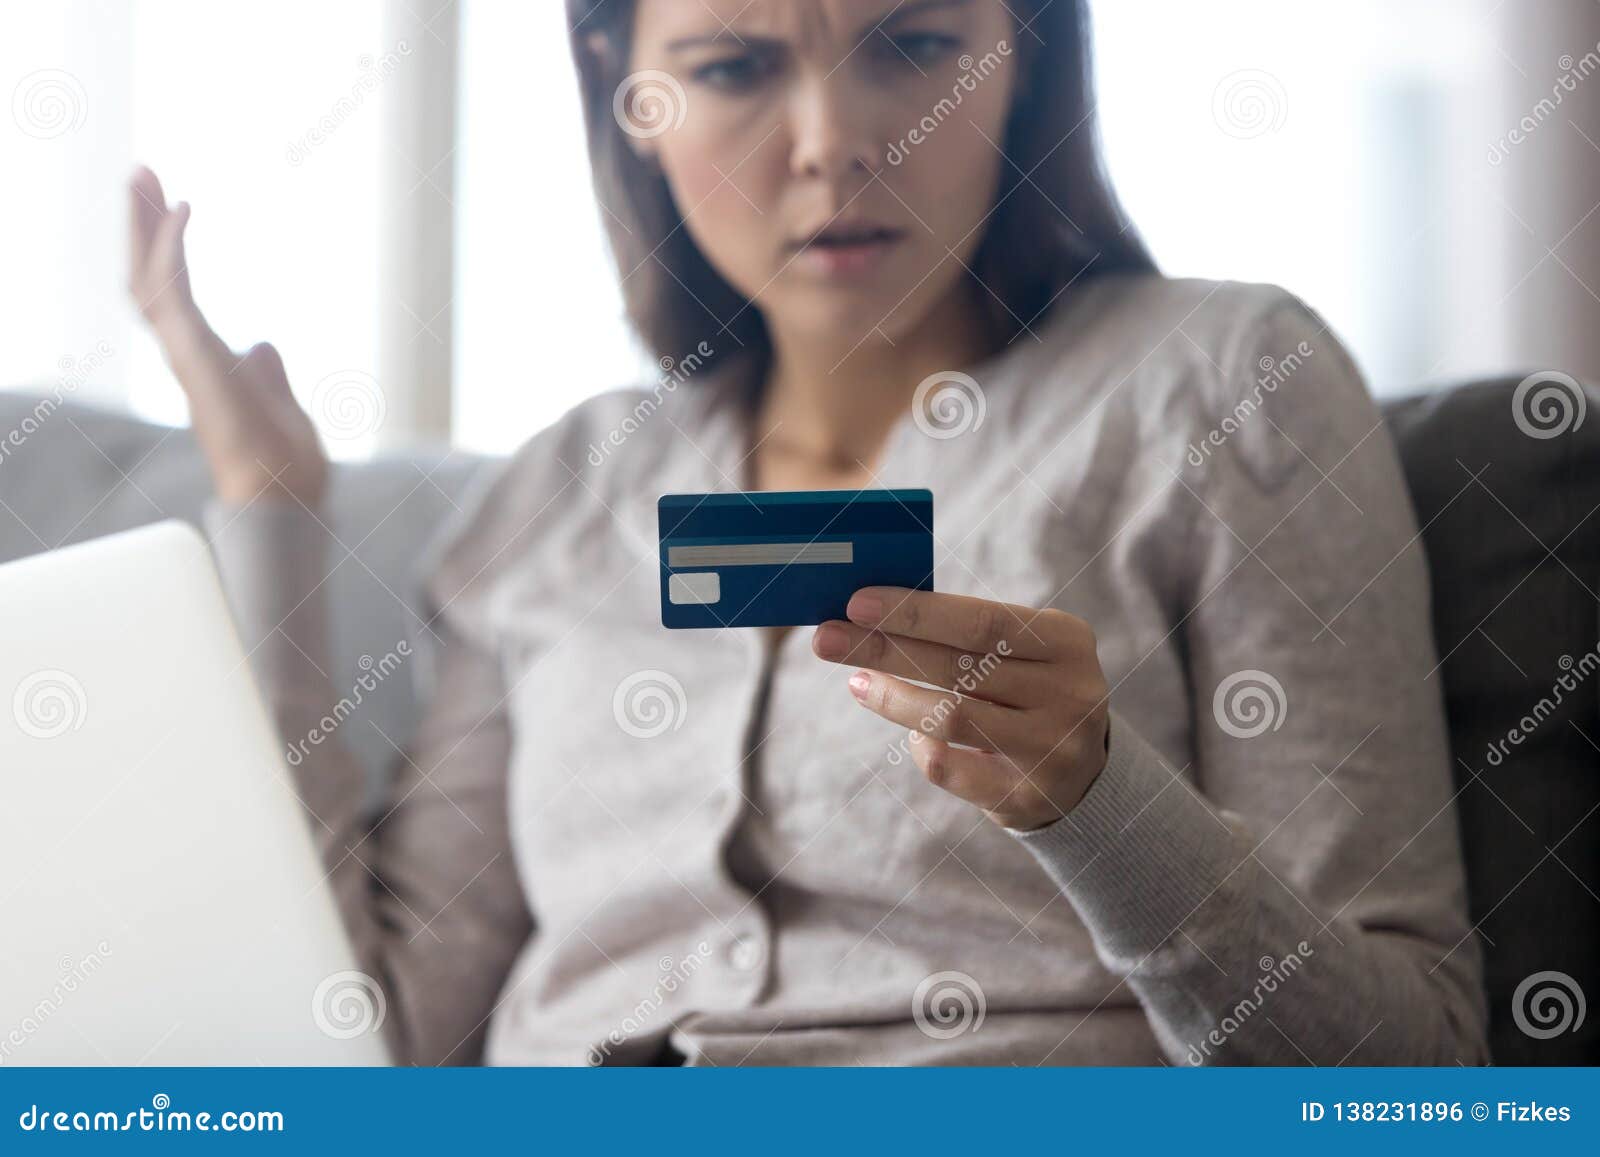 confused female customer holding credit card angry with online payment